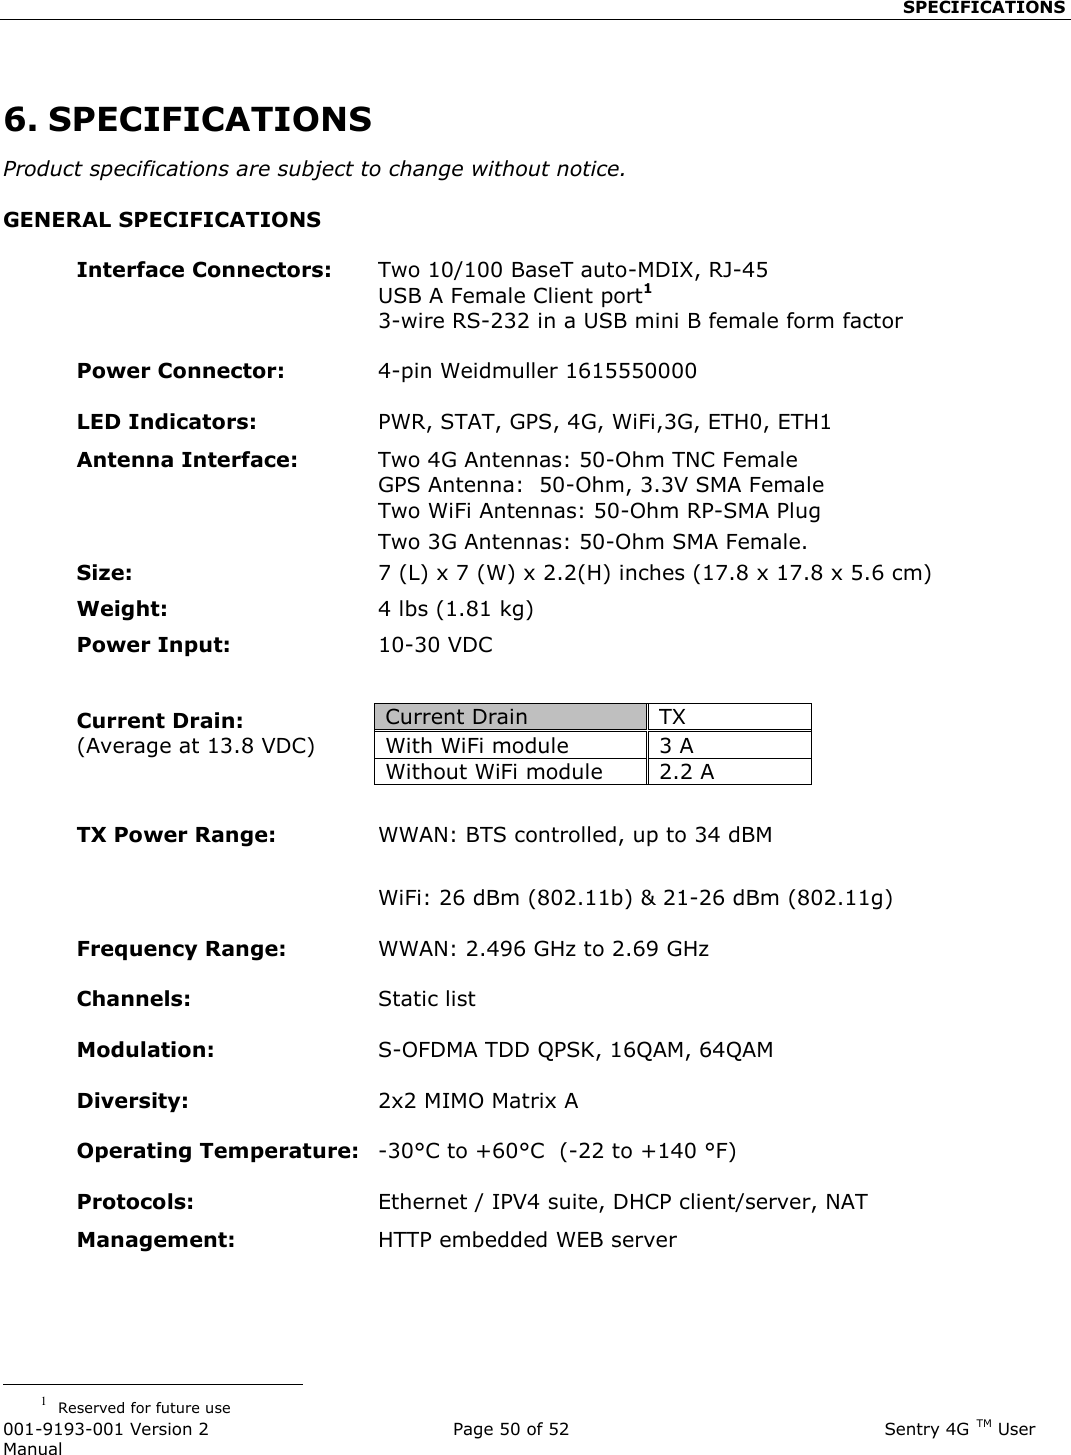                                                    SPECIFICATIONS  001-9193-001 Version 2              Page 50 of 52                              Sentry 4G TM User Manual  6. SPECIFICATIONS Product specifications are subject to change without notice. GENERAL SPECIFICATIONS  Interface Connectors:  Two 10/100 BaseT auto-MDIX, RJ-45   USB A Female Client port1   3-wire RS-232 in a USB mini B female form factor   Power Connector:      4-pin Weidmuller 1615550000   LED Indicators:  PWR, STAT, GPS, 4G, WiFi,3G, ETH0, ETH1 Antenna Interface:   Two 4G Antennas: 50-Ohm TNC Female   GPS Antenna:  50-Ohm, 3.3V SMA Female   Two WiFi Antennas: 50-Ohm RP-SMA Plug   Two 3G Antennas: 50-Ohm SMA Female. Size:  7 (L) x 7 (W) x 2.2(H) inches (17.8 x 17.8 x 5.6 cm) Weight:   4 lbs (1.81 kg) Power Input:   10-30 VDC     Current Drain: (Average at 13.8 VDC)   TX Power Range:  WWAN: BTS controlled, up to 34 dBM    WiFi: 26 dBm (802.11b) &amp; 21-26 dBm (802.11g)  Frequency Range:  WWAN: 2.496 GHz to 2.69 GHz   Channels:  Static list  Modulation:  S-OFDMA TDD QPSK, 16QAM, 64QAM     Diversity:  2x2 MIMO Matrix A   Operating Temperature:  -30°C to +60°C  (-22 to +140 °F)   Protocols:  Ethernet / IPV4 suite, DHCP client/server, NAT Management:     HTTP embedded WEB server                                                   1  Reserved for future use Current Drain TX  With WiFi module 3 A Without WiFi module 2.2 A 